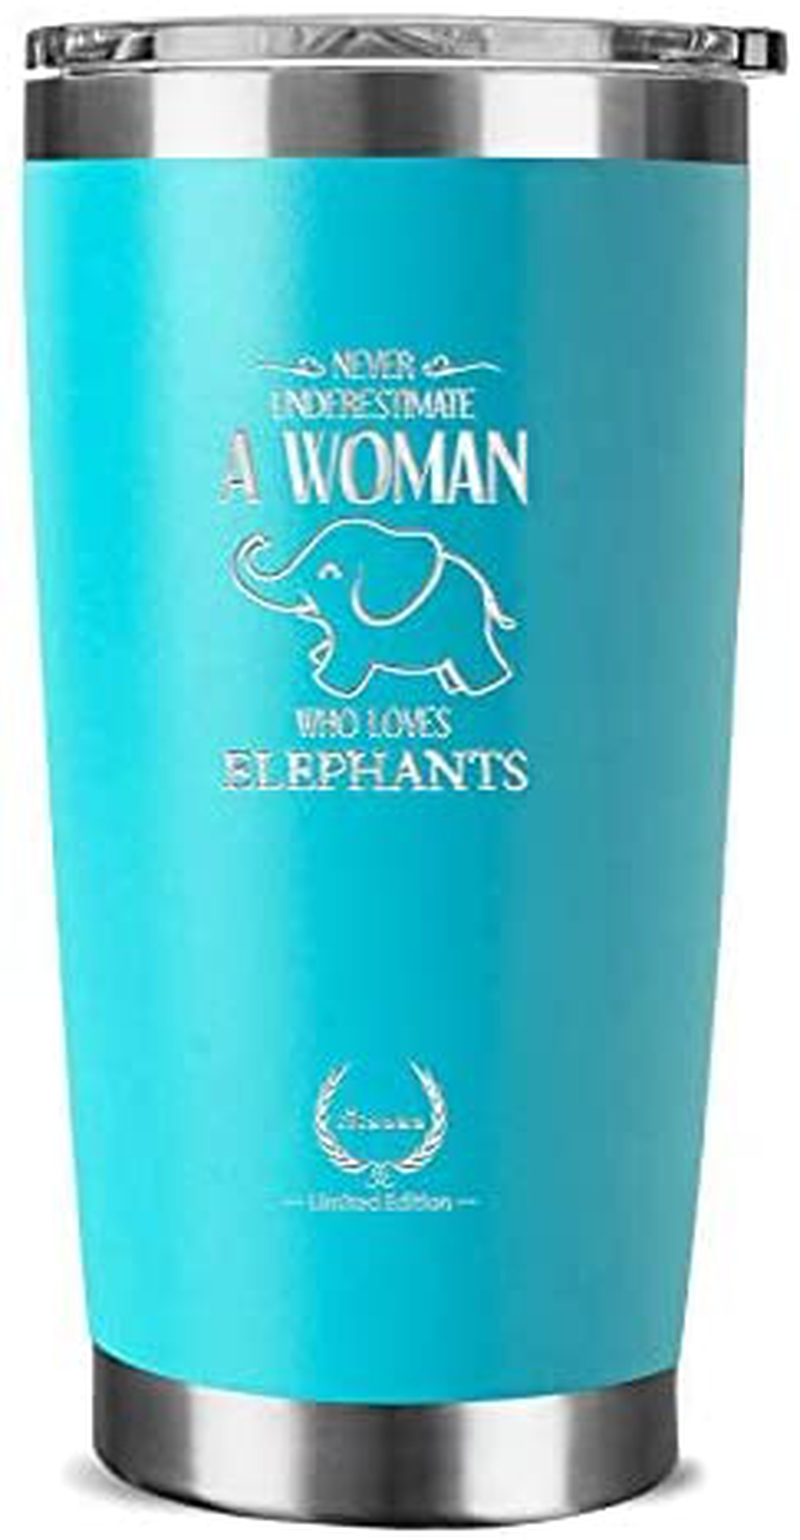 Elephant Gifts for Women-Unique Mothers Day Gifts Birthday Gifts for Her Funny Novelty Wine glass Personalized Present for Girlfriend,Coworkers, Friends Insulated Tumbler 20oz Blue